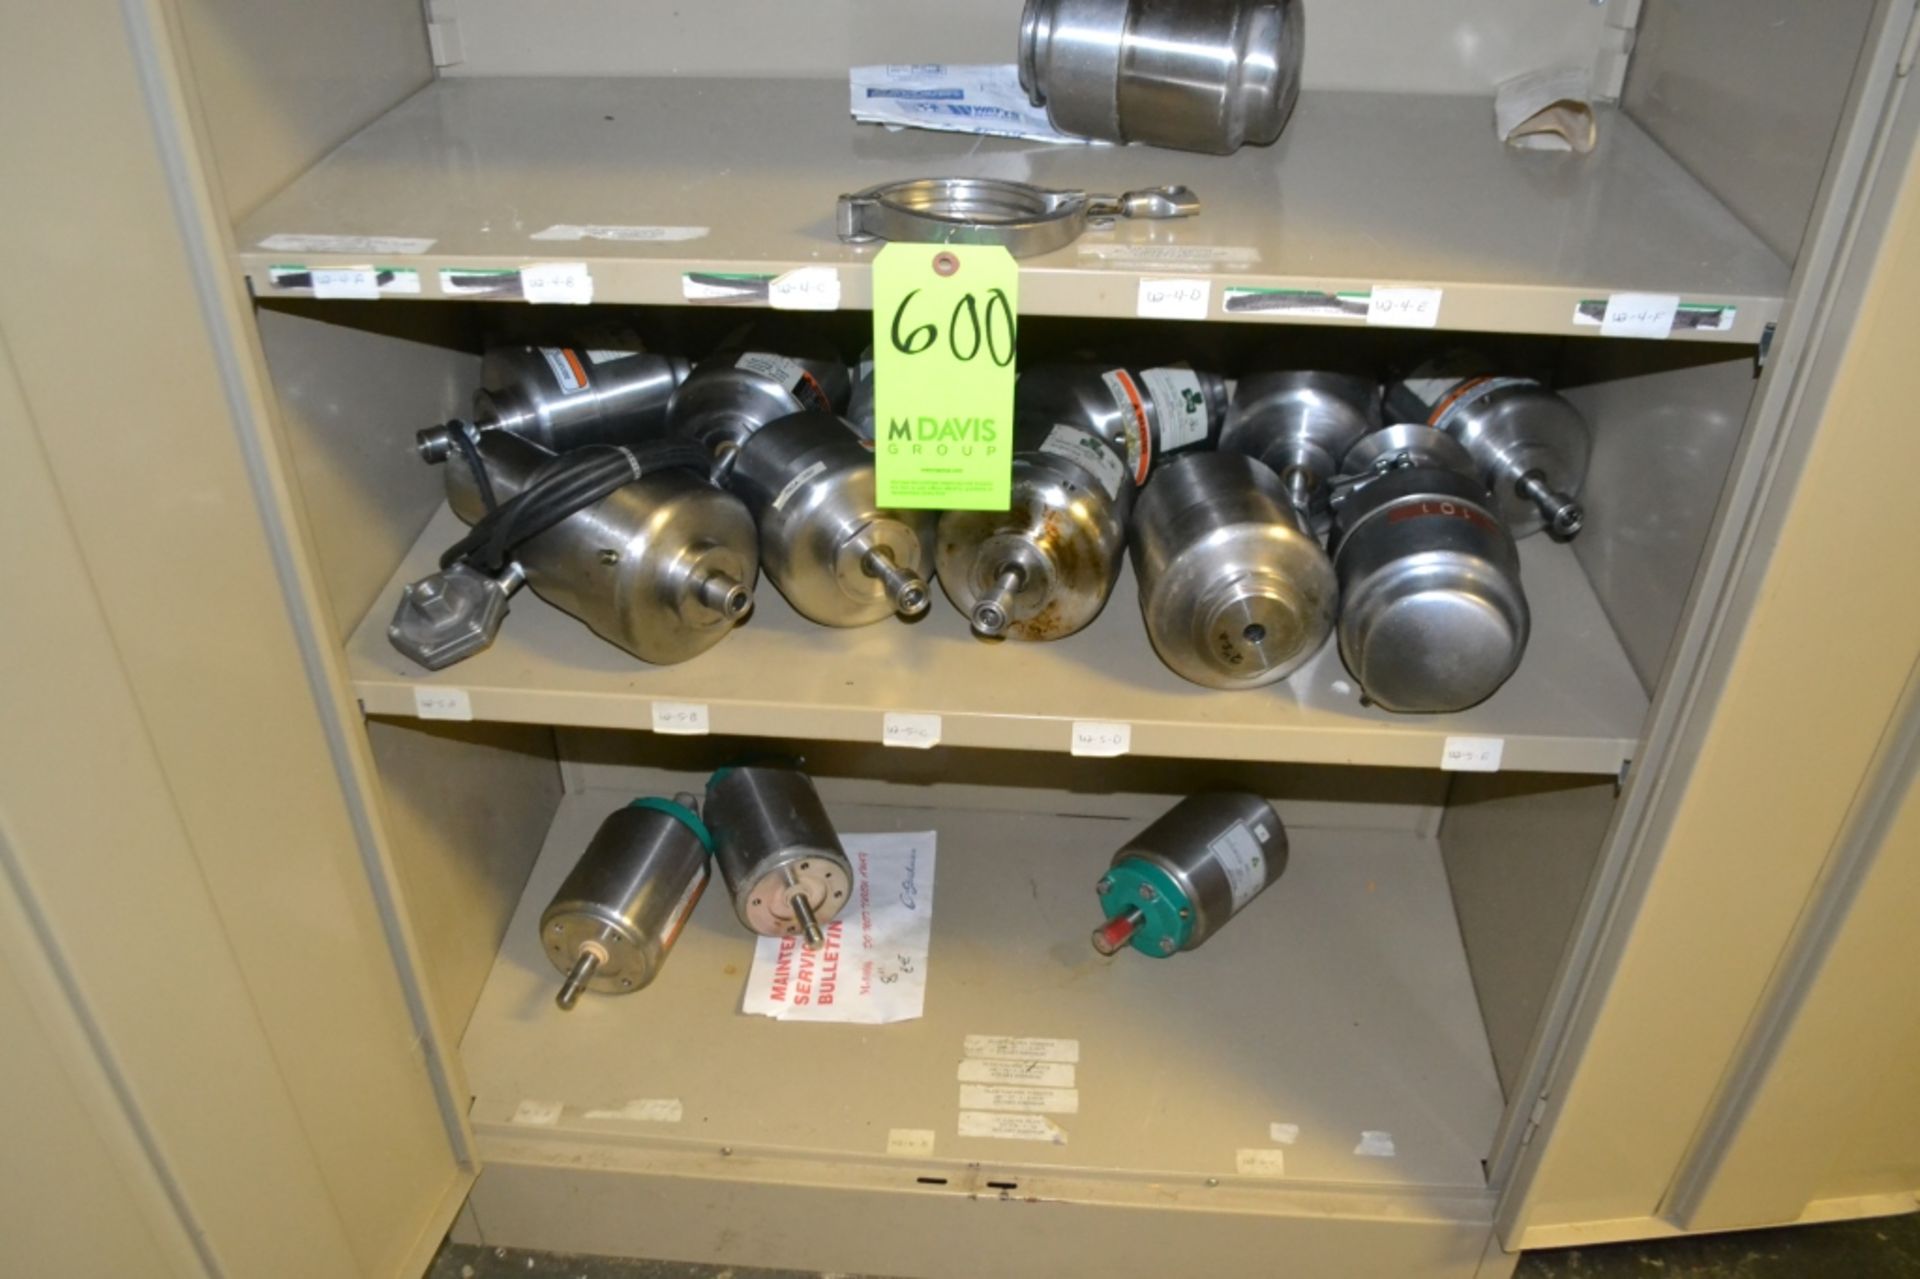 Lot of Air Valve Parts Including Over (20) Actuators and Numerous Bodies and Assorted Parts on Shelf - Bild 2 aus 2